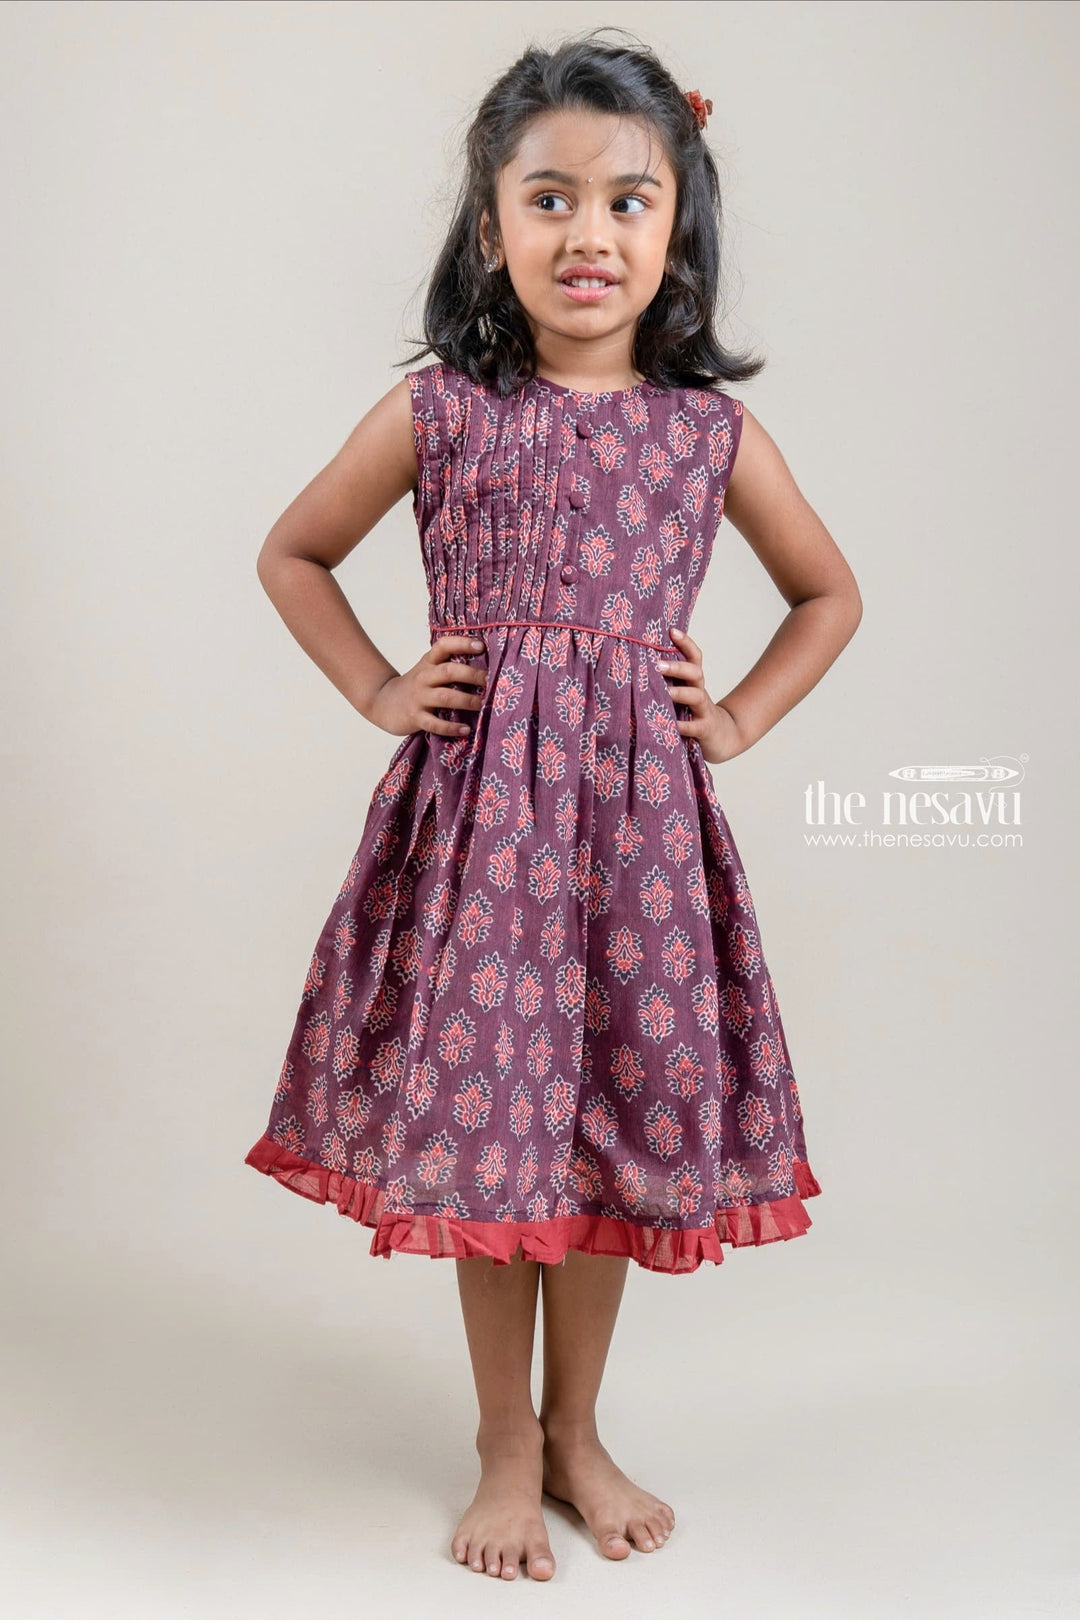 The Nesavu Girls Fancy Frock Adorable Hand Block Printed Sleeveless Brown Cotton Frock for Girls Nesavu 16 (1Y) / Brown / Cotton GFC1055A-16 Adorable Hand Block Printed Sleeveless Brown Cotton Frock for Girls | Buy Online at The Nesavu